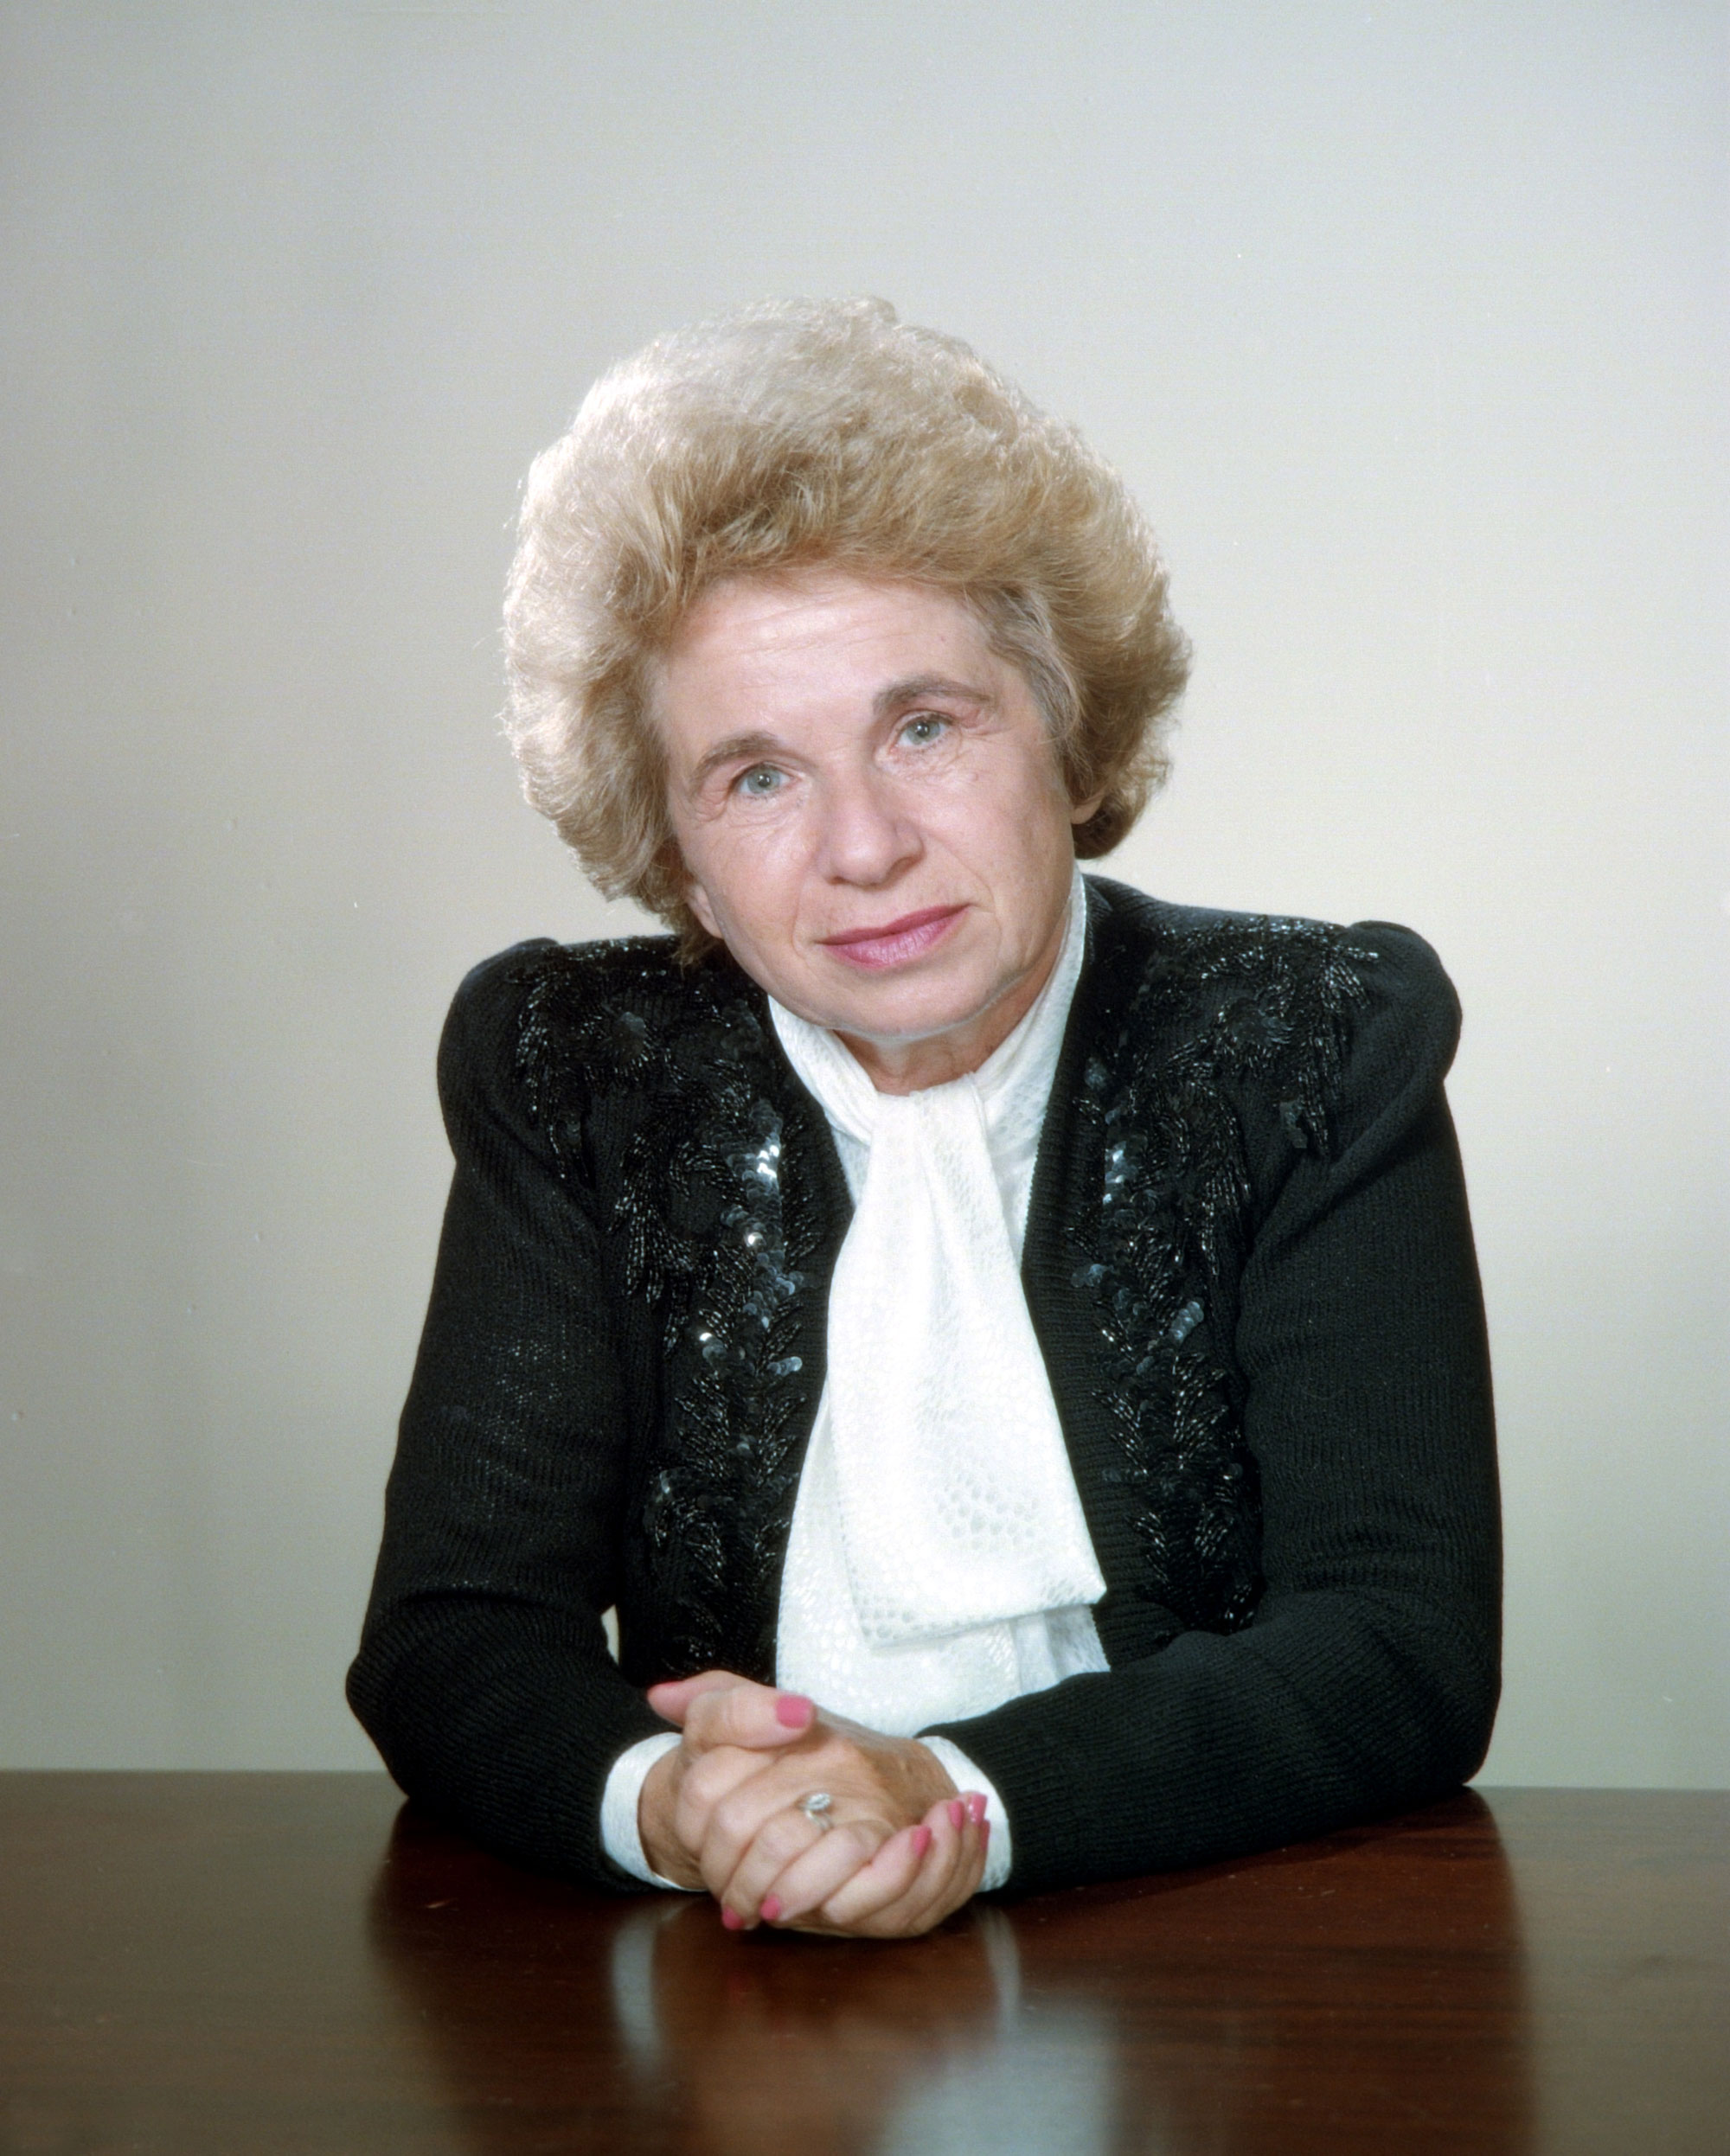 Dr. Ruth Westheimer in 1984.